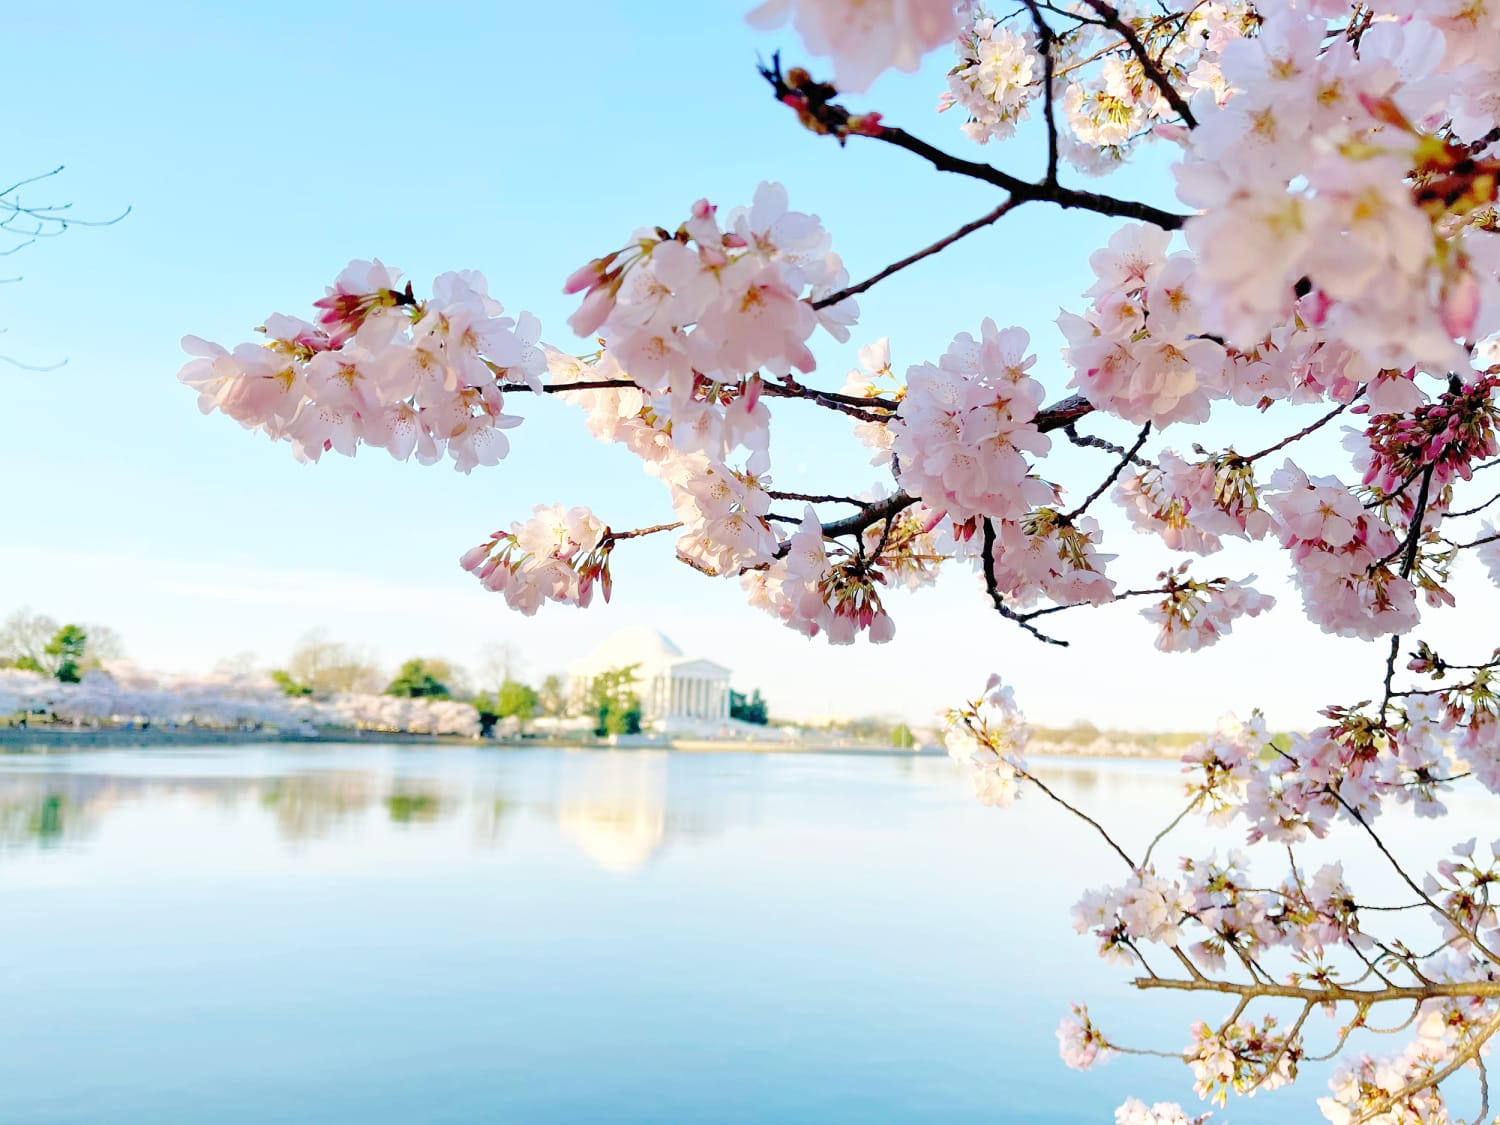 How to See the Washington, D.C., Cherry Blossoms This Year